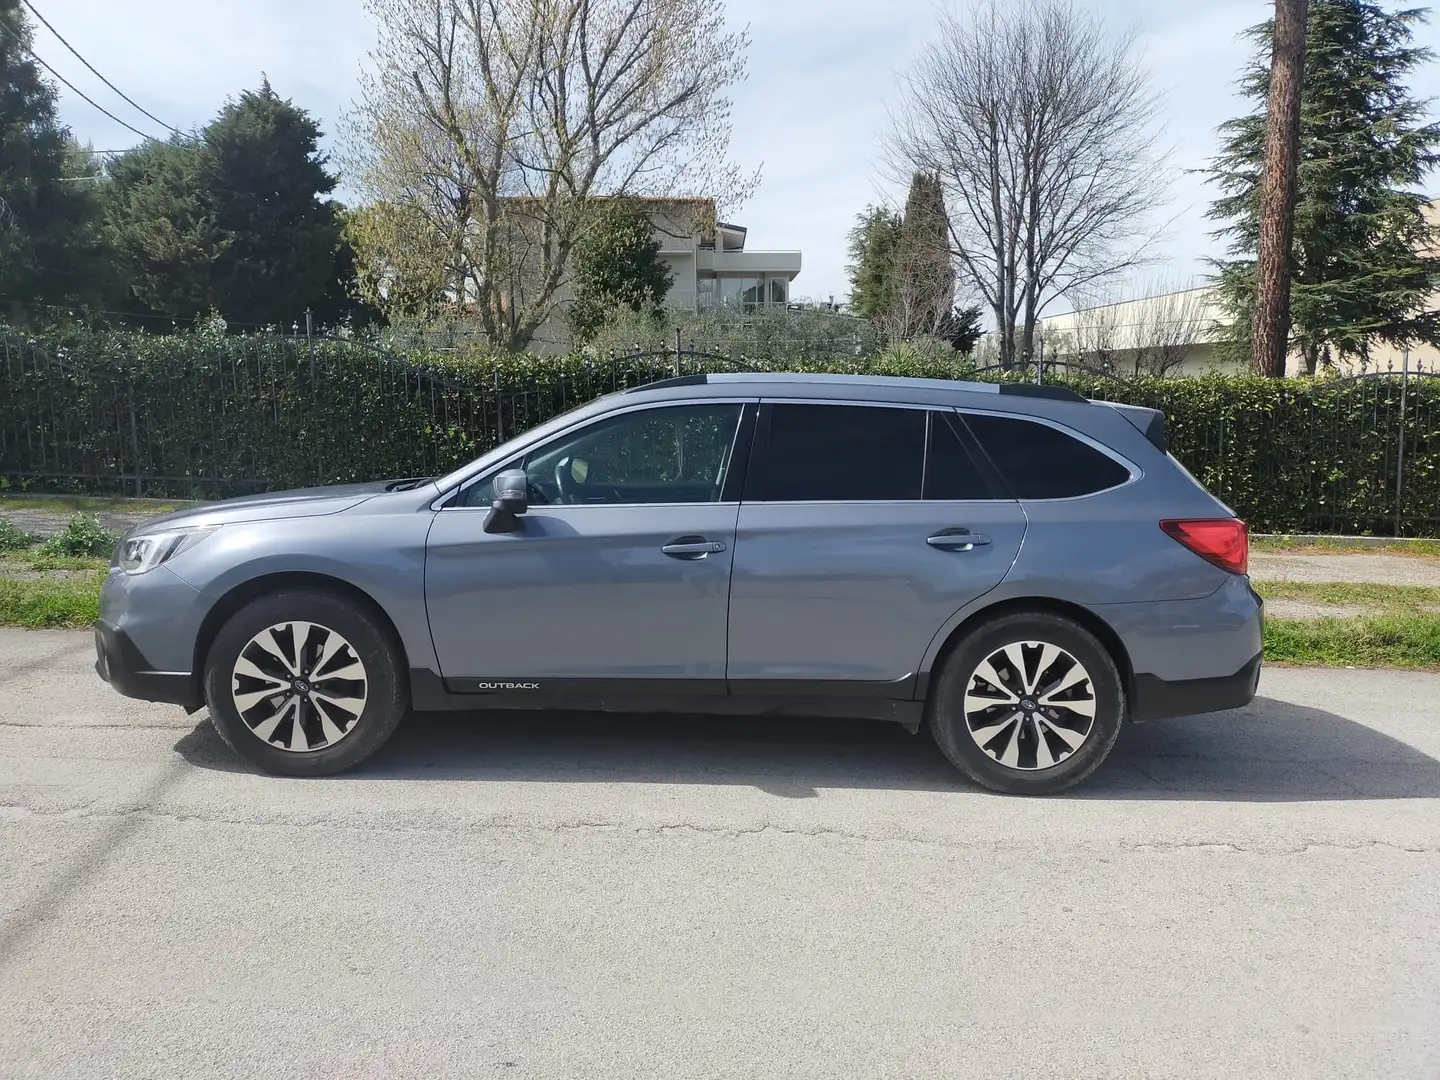 Subaru OUTBACK Outback 2.5i Unlimited lineartronic my16 - 2